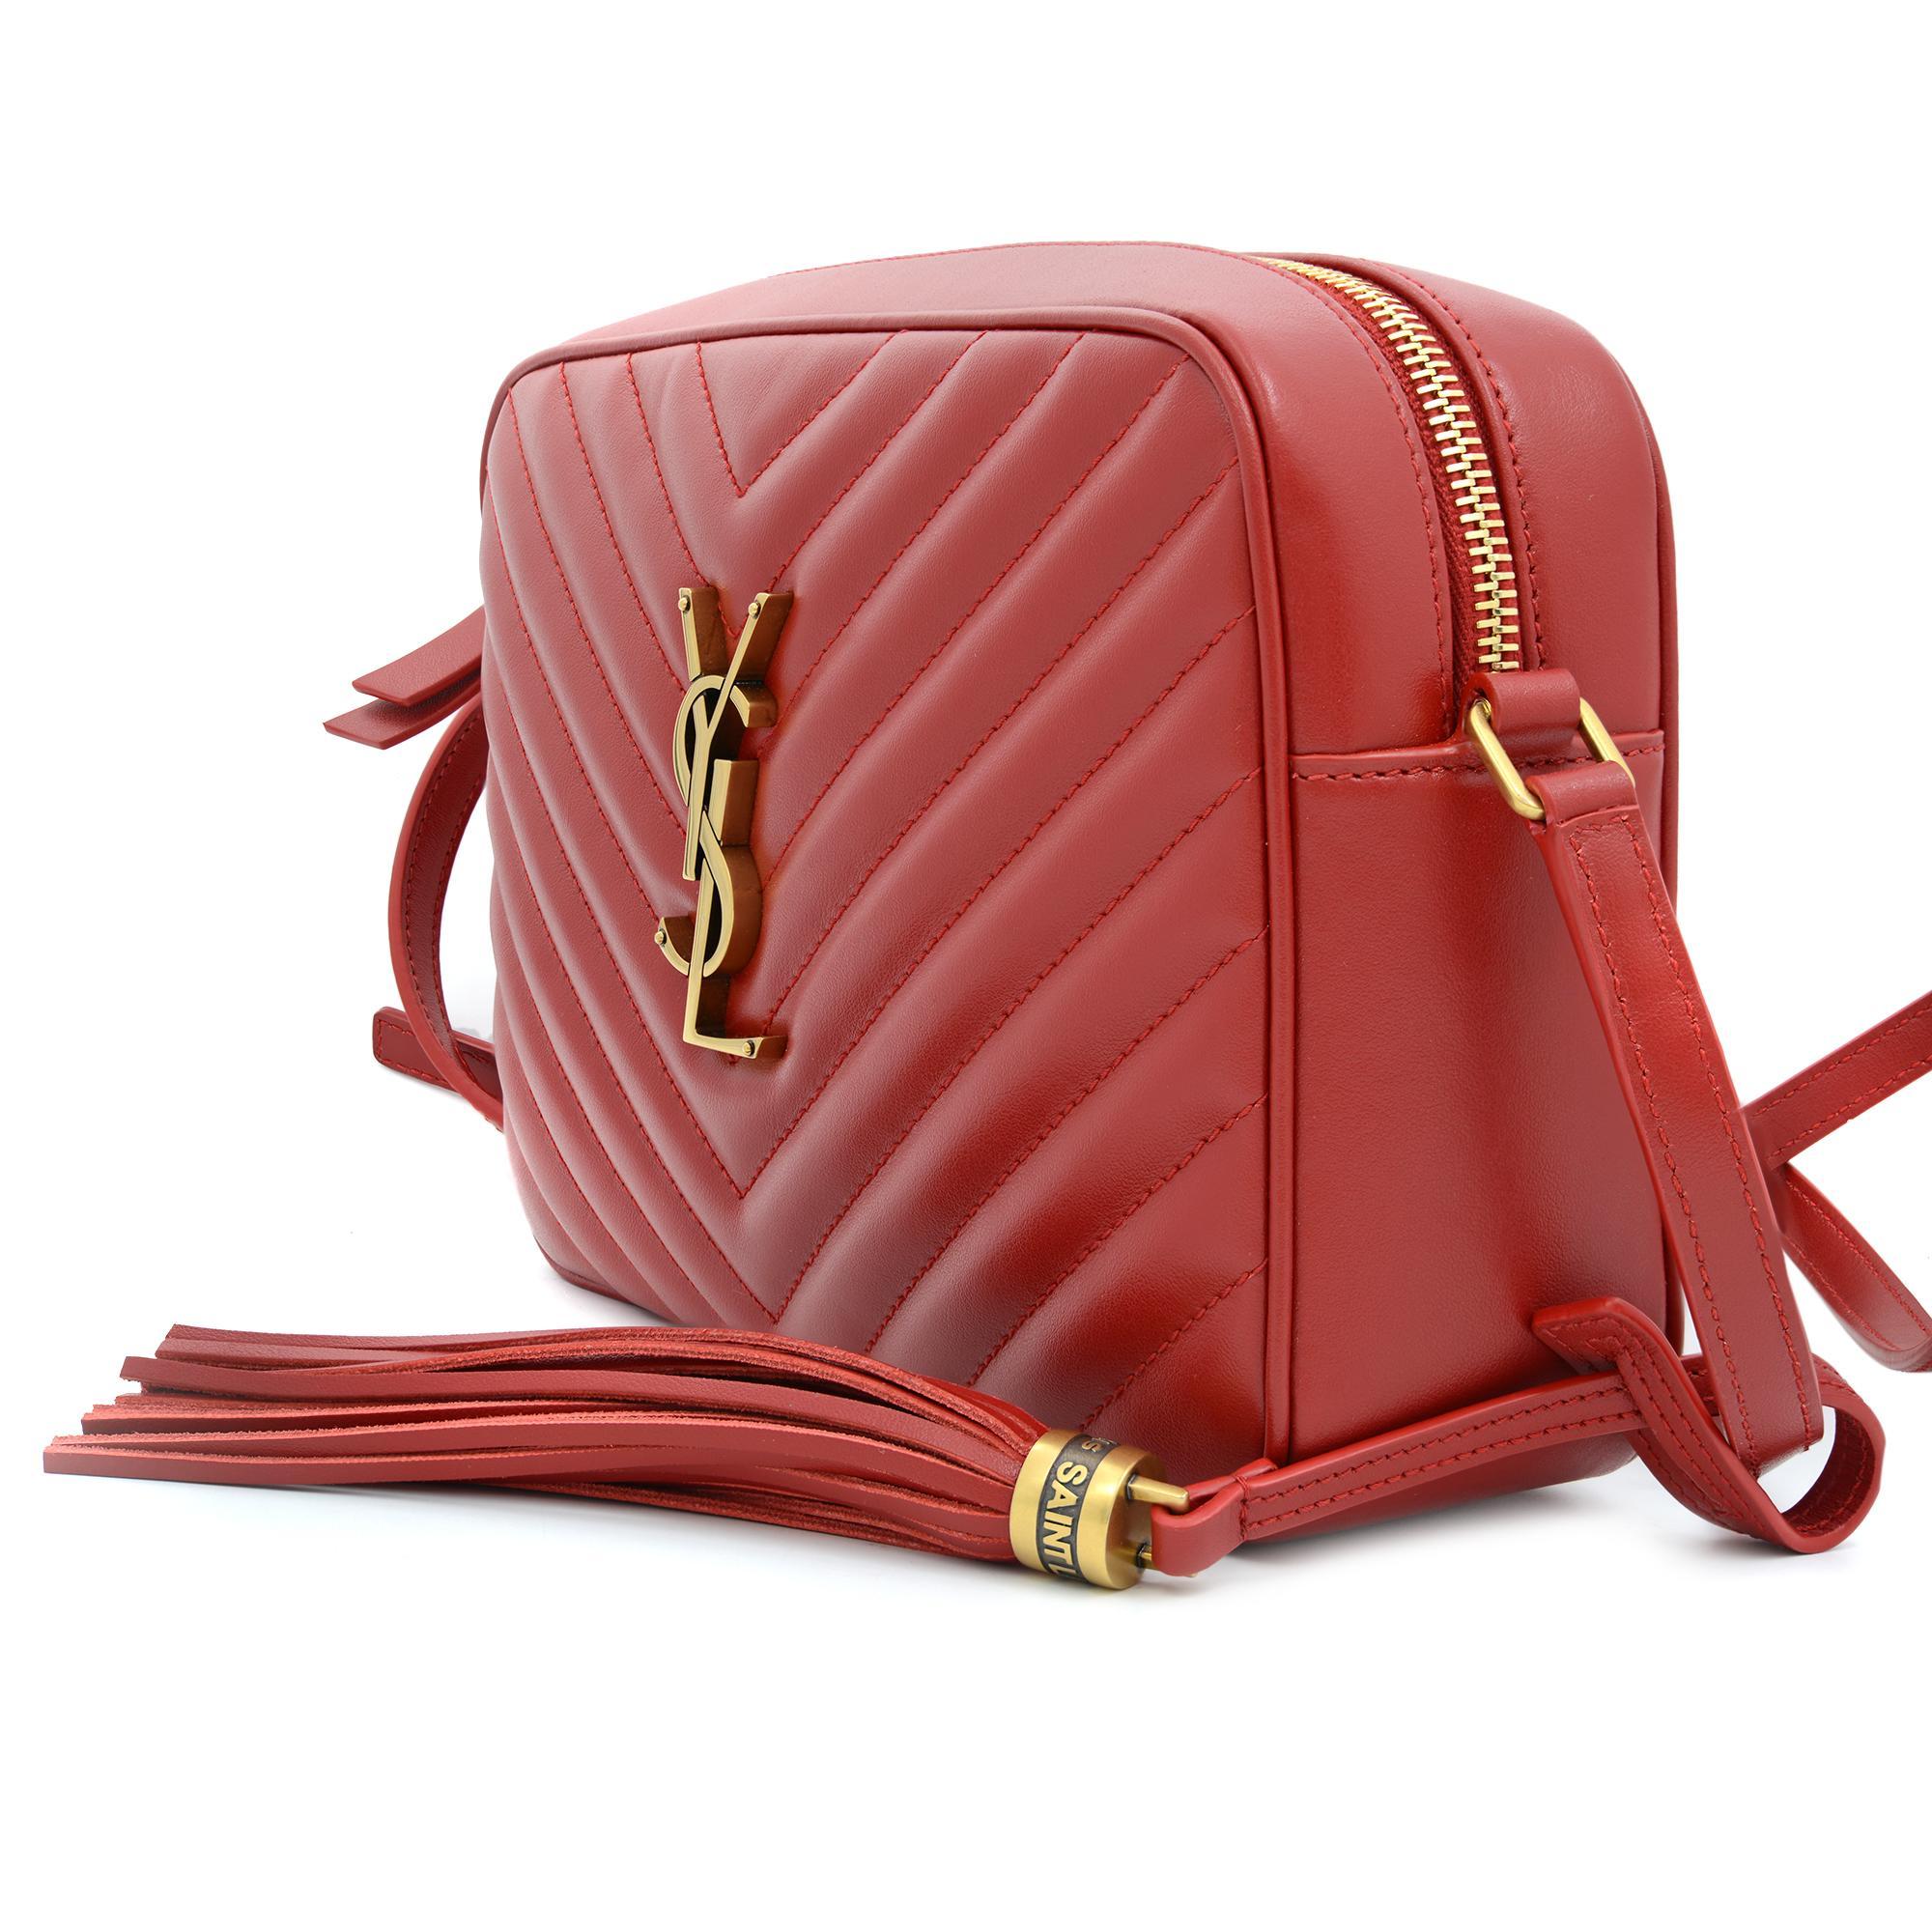 Lou Matelassé Red Leather Camera Bag by Yves Saint Laurent. Features quilted leather with removable tassel detail and iconic YSL logo initials interlaced in metal at the center. Comes with top zip closure and an adjustable shoulder strap with 23